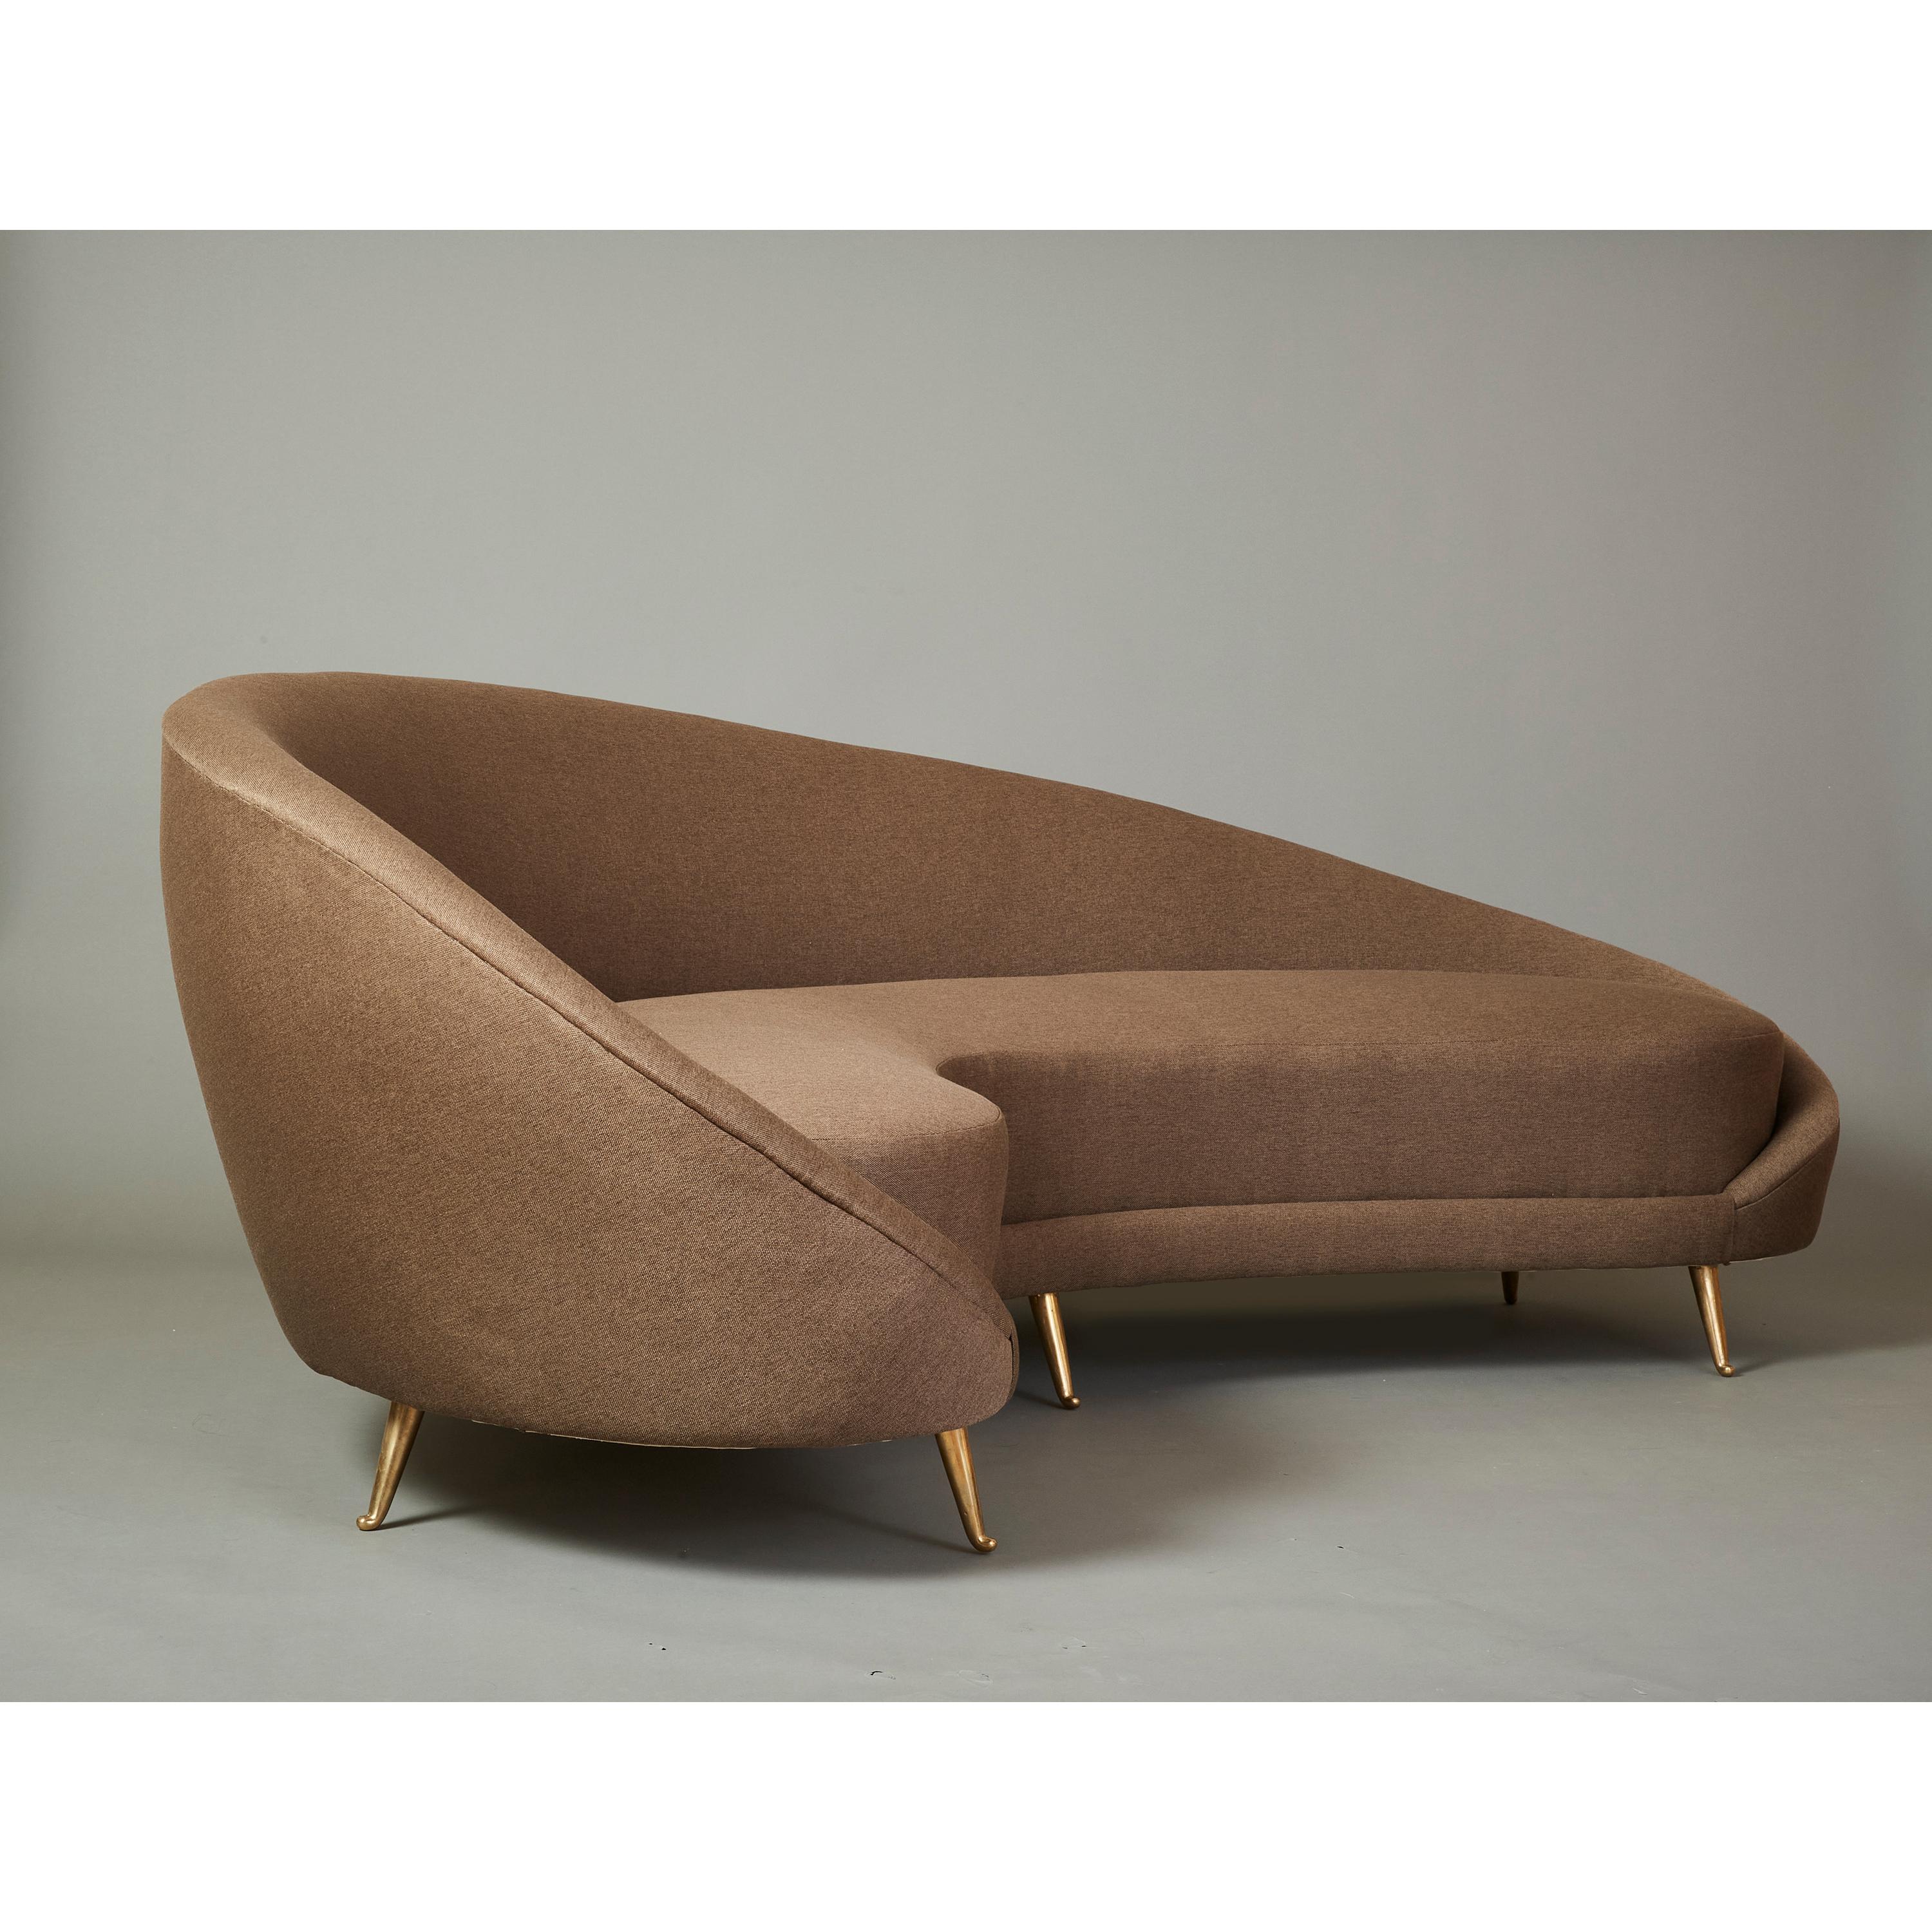 Federico Munari Curved Boomerang Sofa with Polished Brass Legs, Italy 1950's For Sale 4